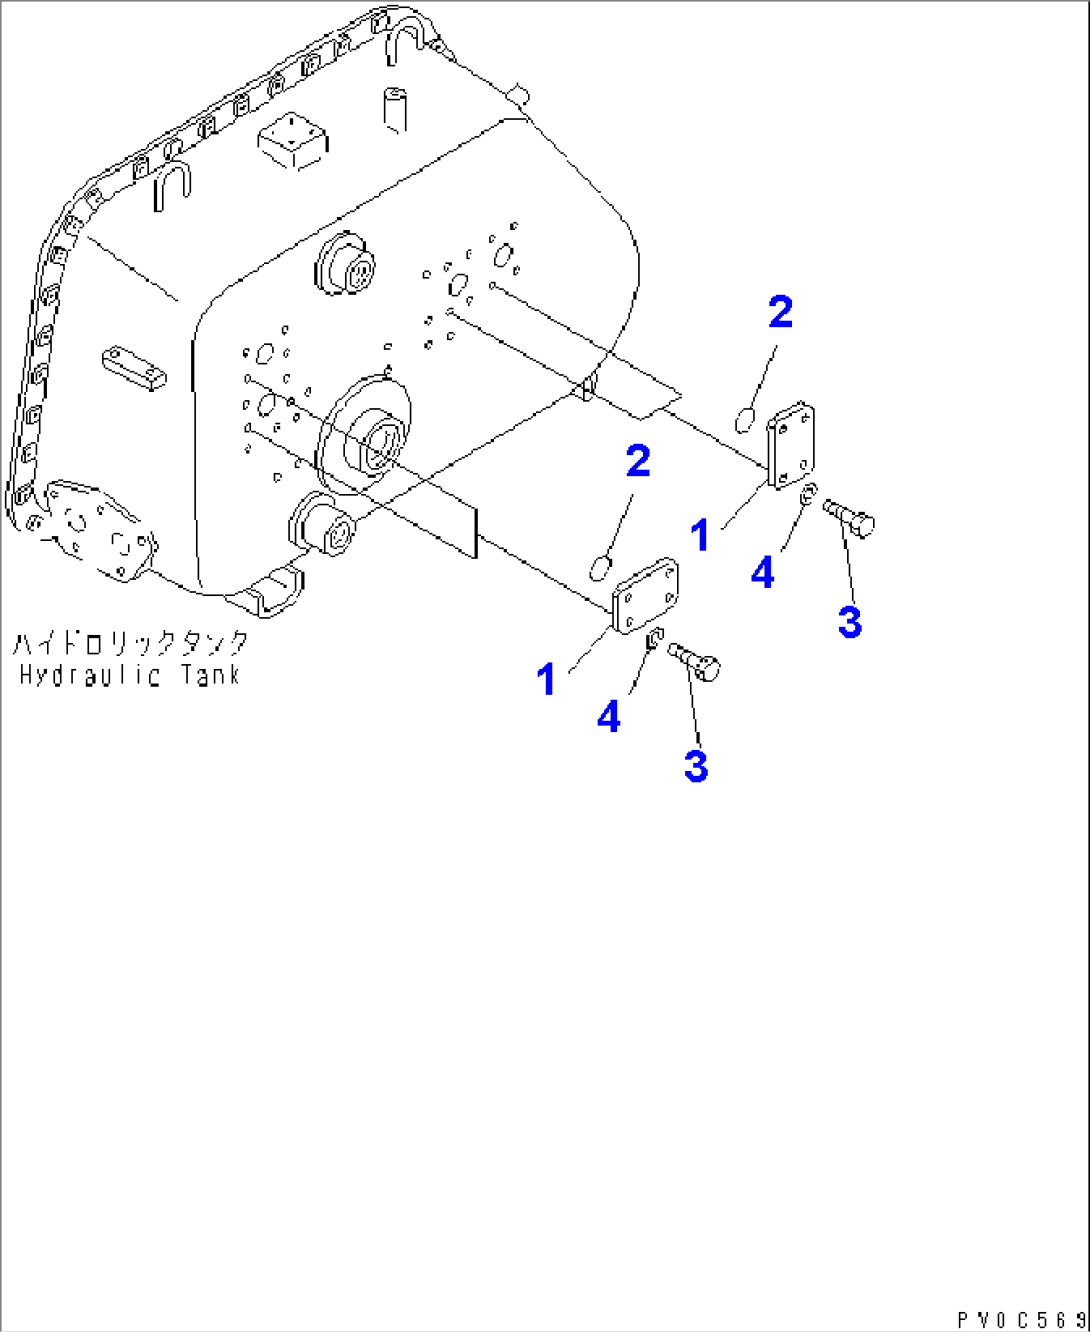 HTDRAULIC TANK (FOR 4V)